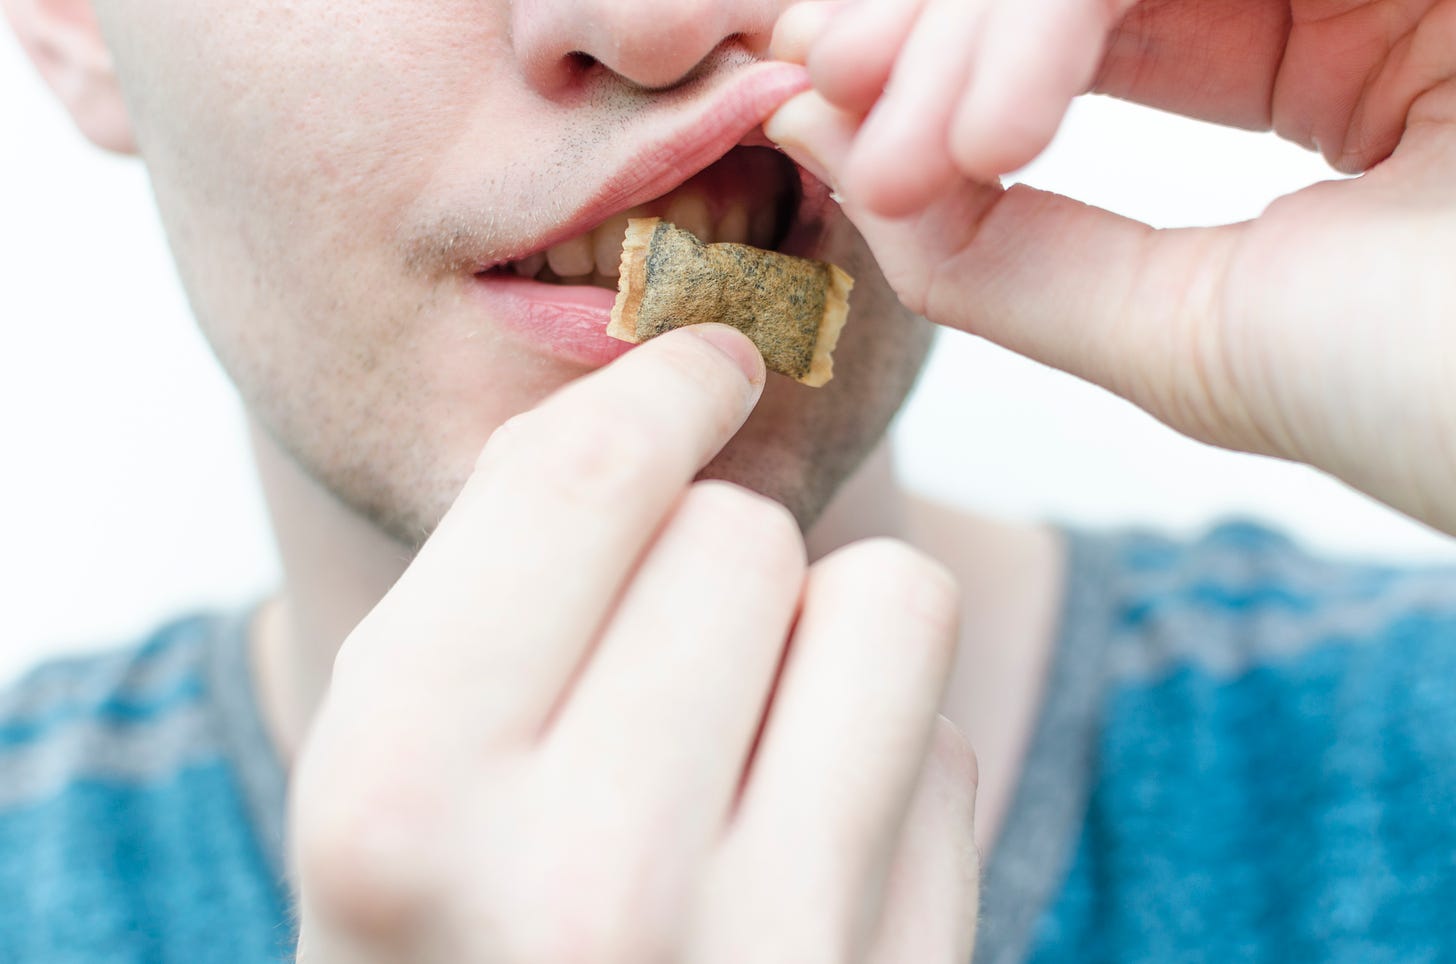 Teen boy putting a tobacco pouch in his mouth